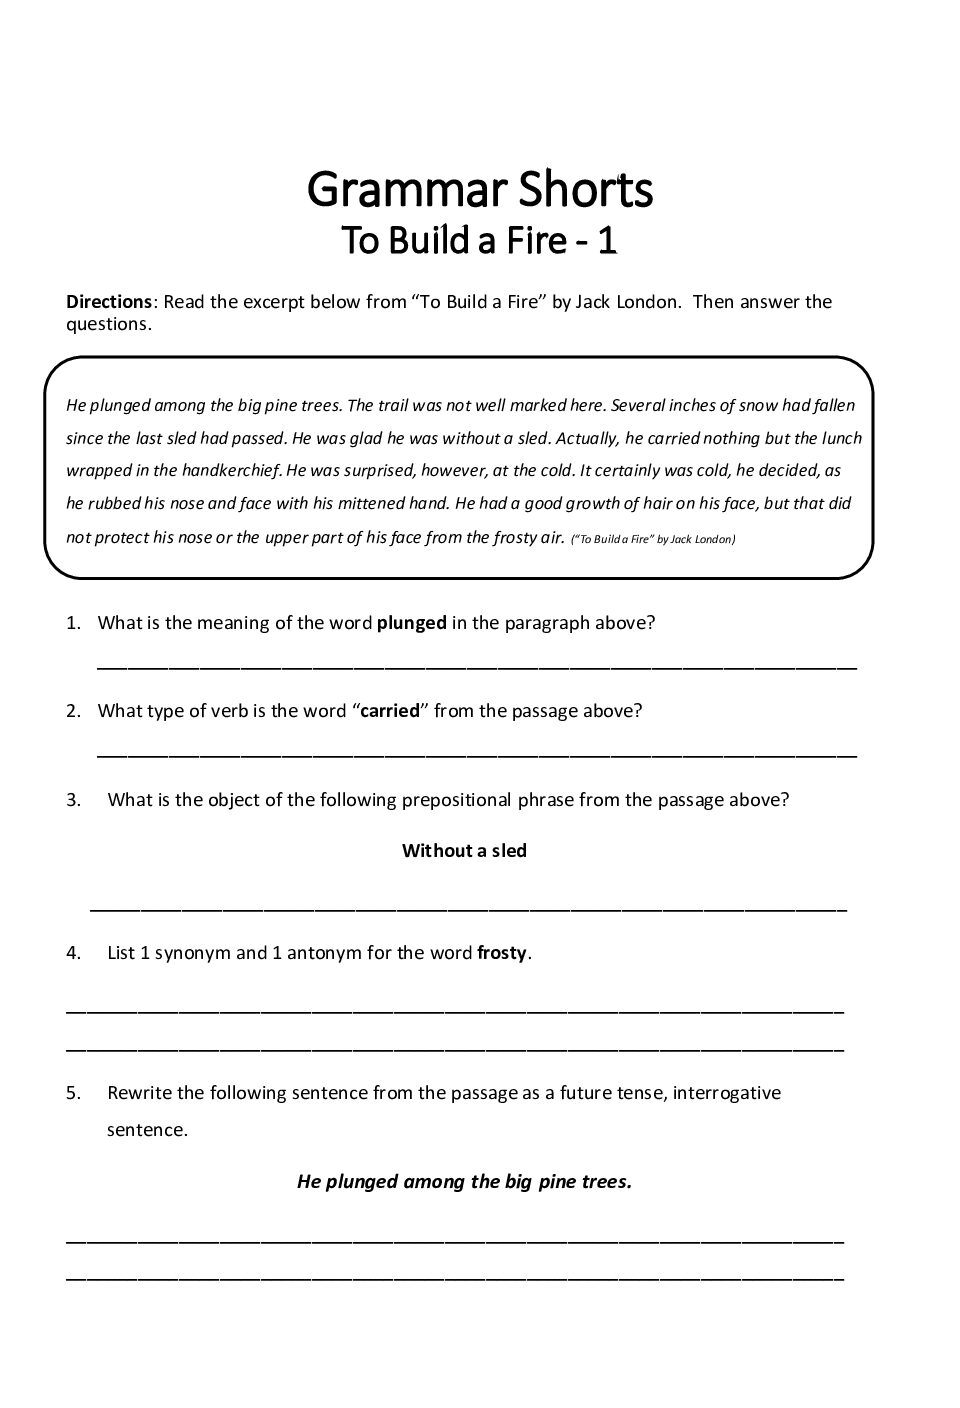 To Build a Fire Galery 3